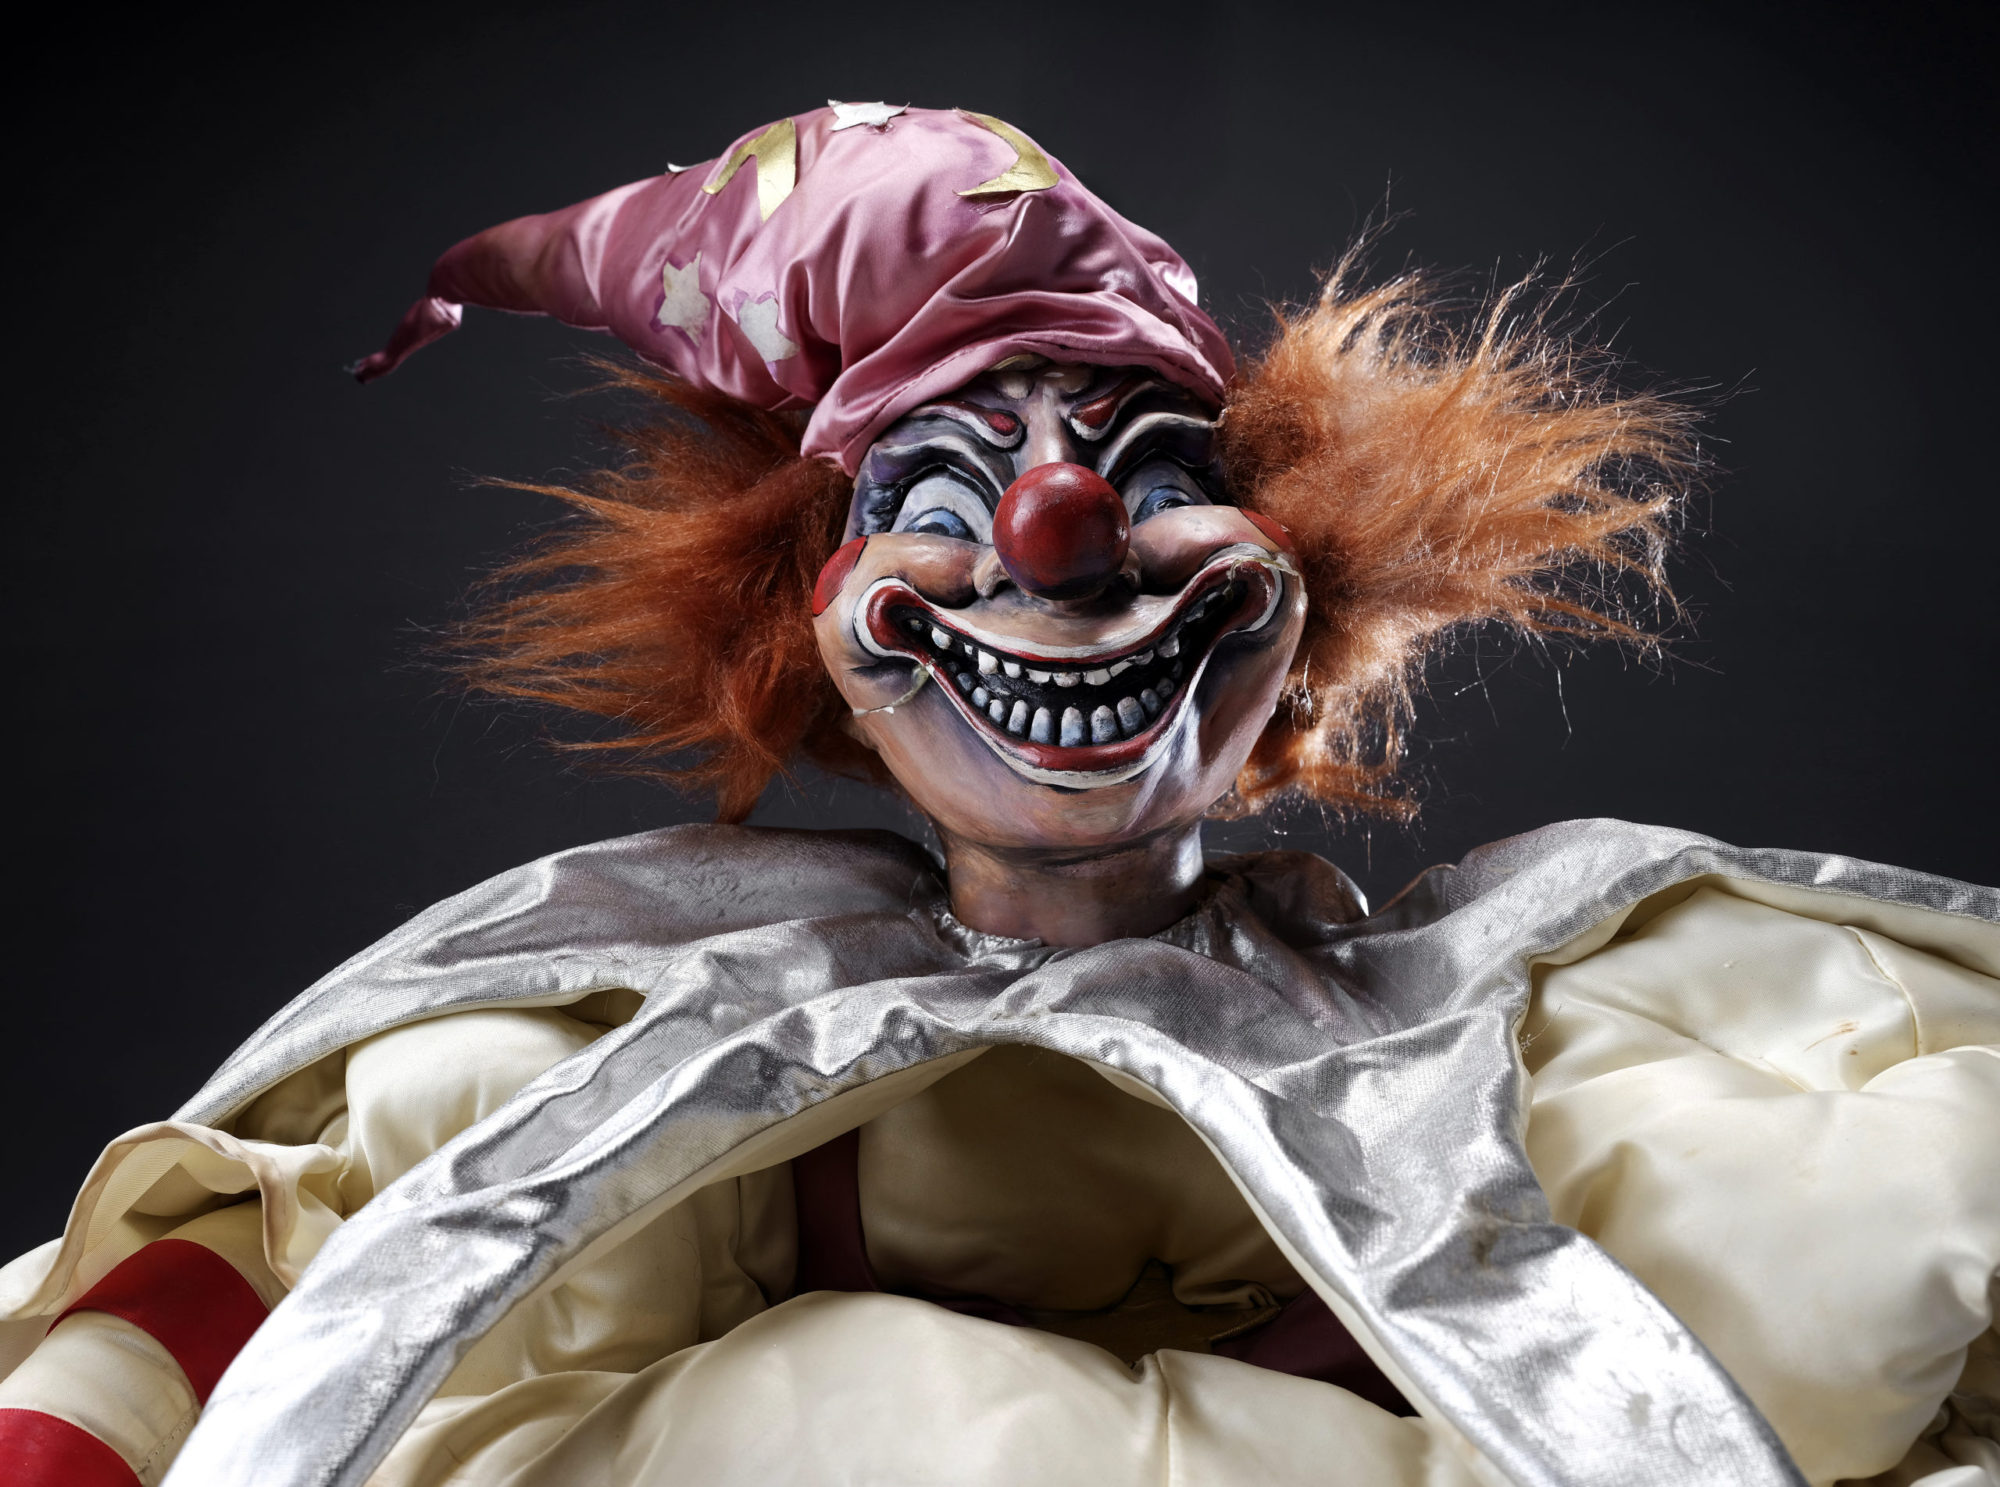 https://bloody-disgusting.com/wp-content/uploads/2023/06/153582_Evil-Clown-Doll_9-scaled-e1686768734709.jpg